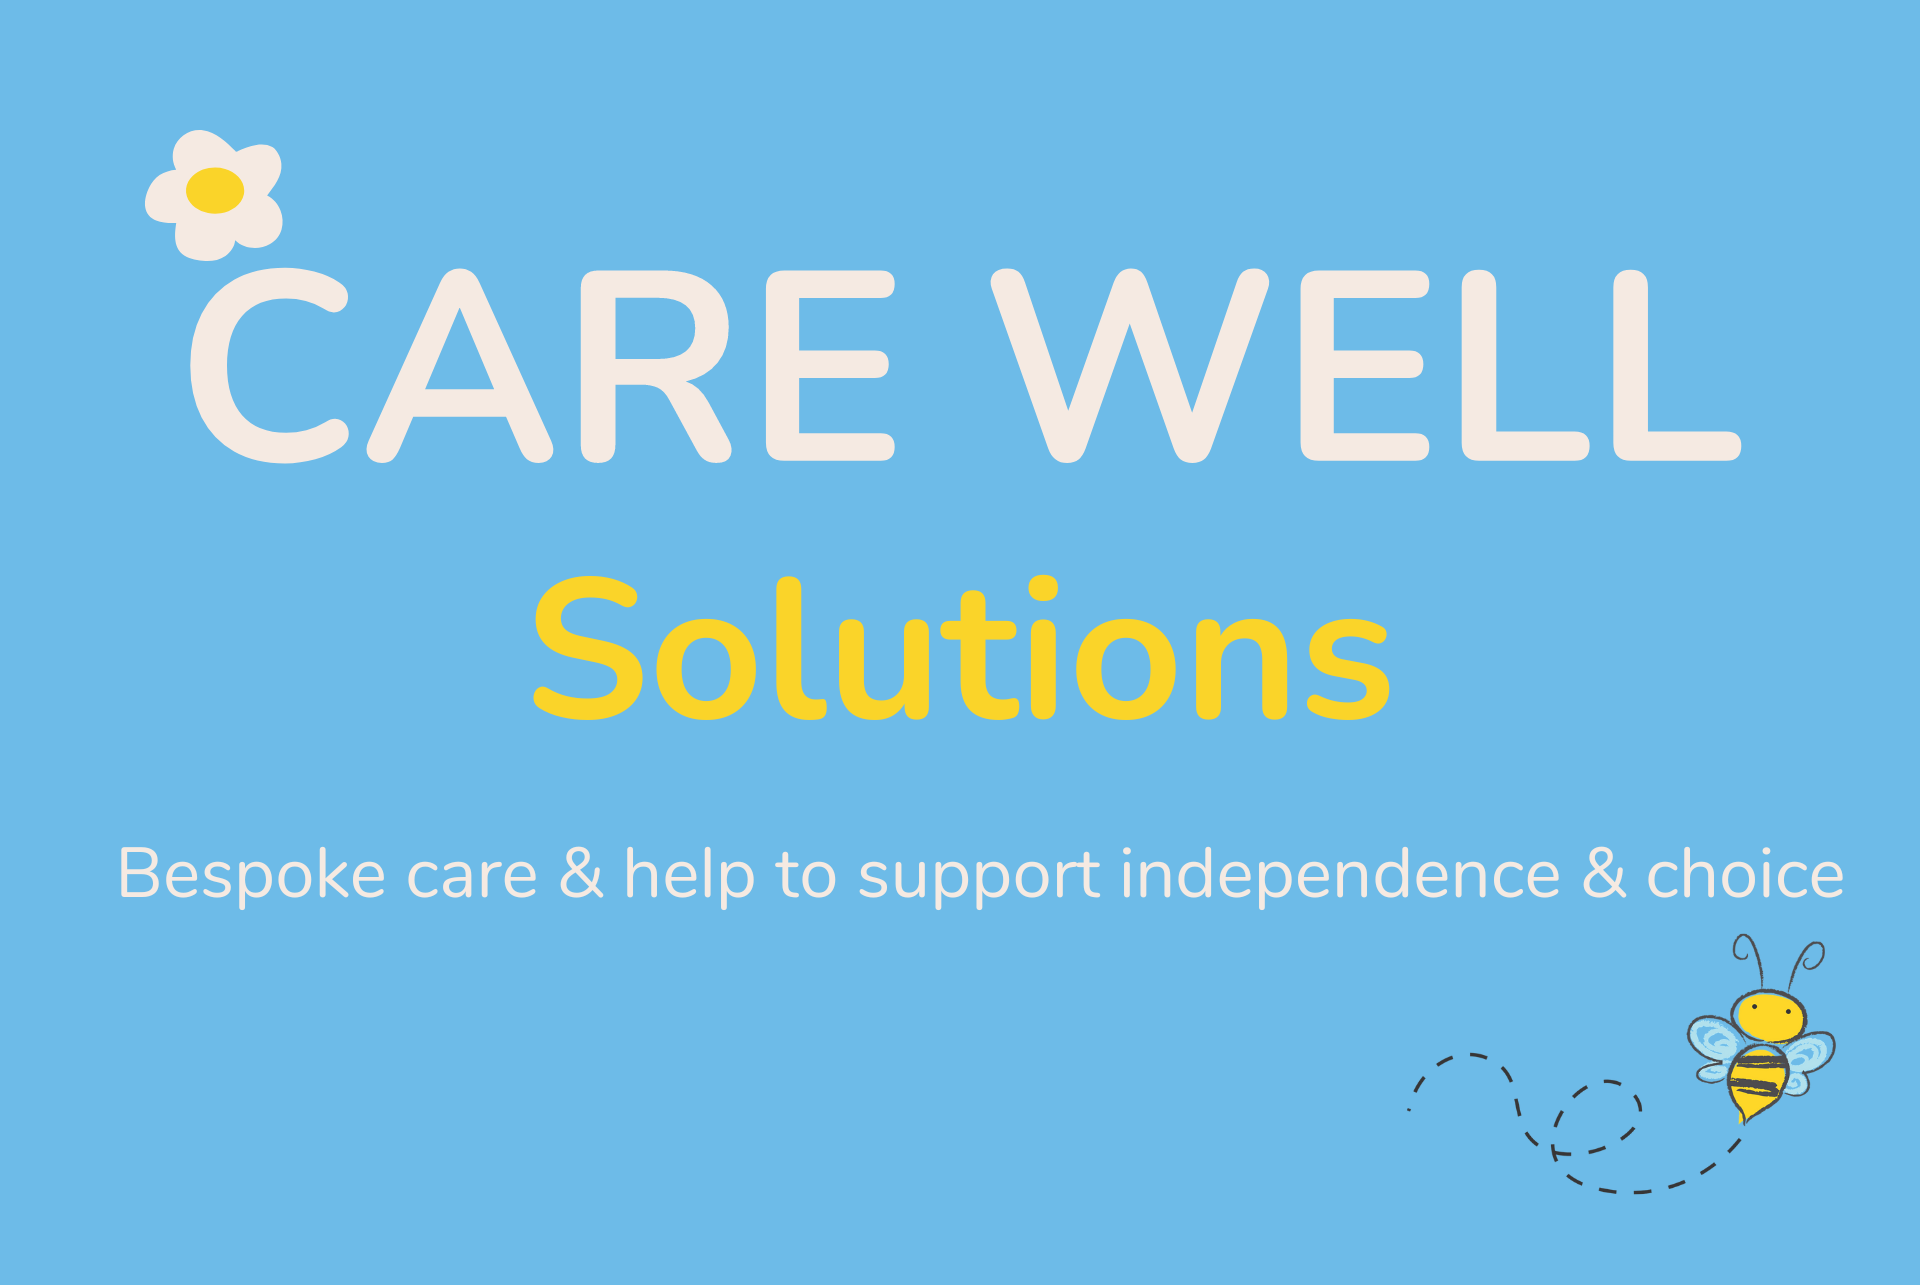 Care Well Solutions for care and support at home.